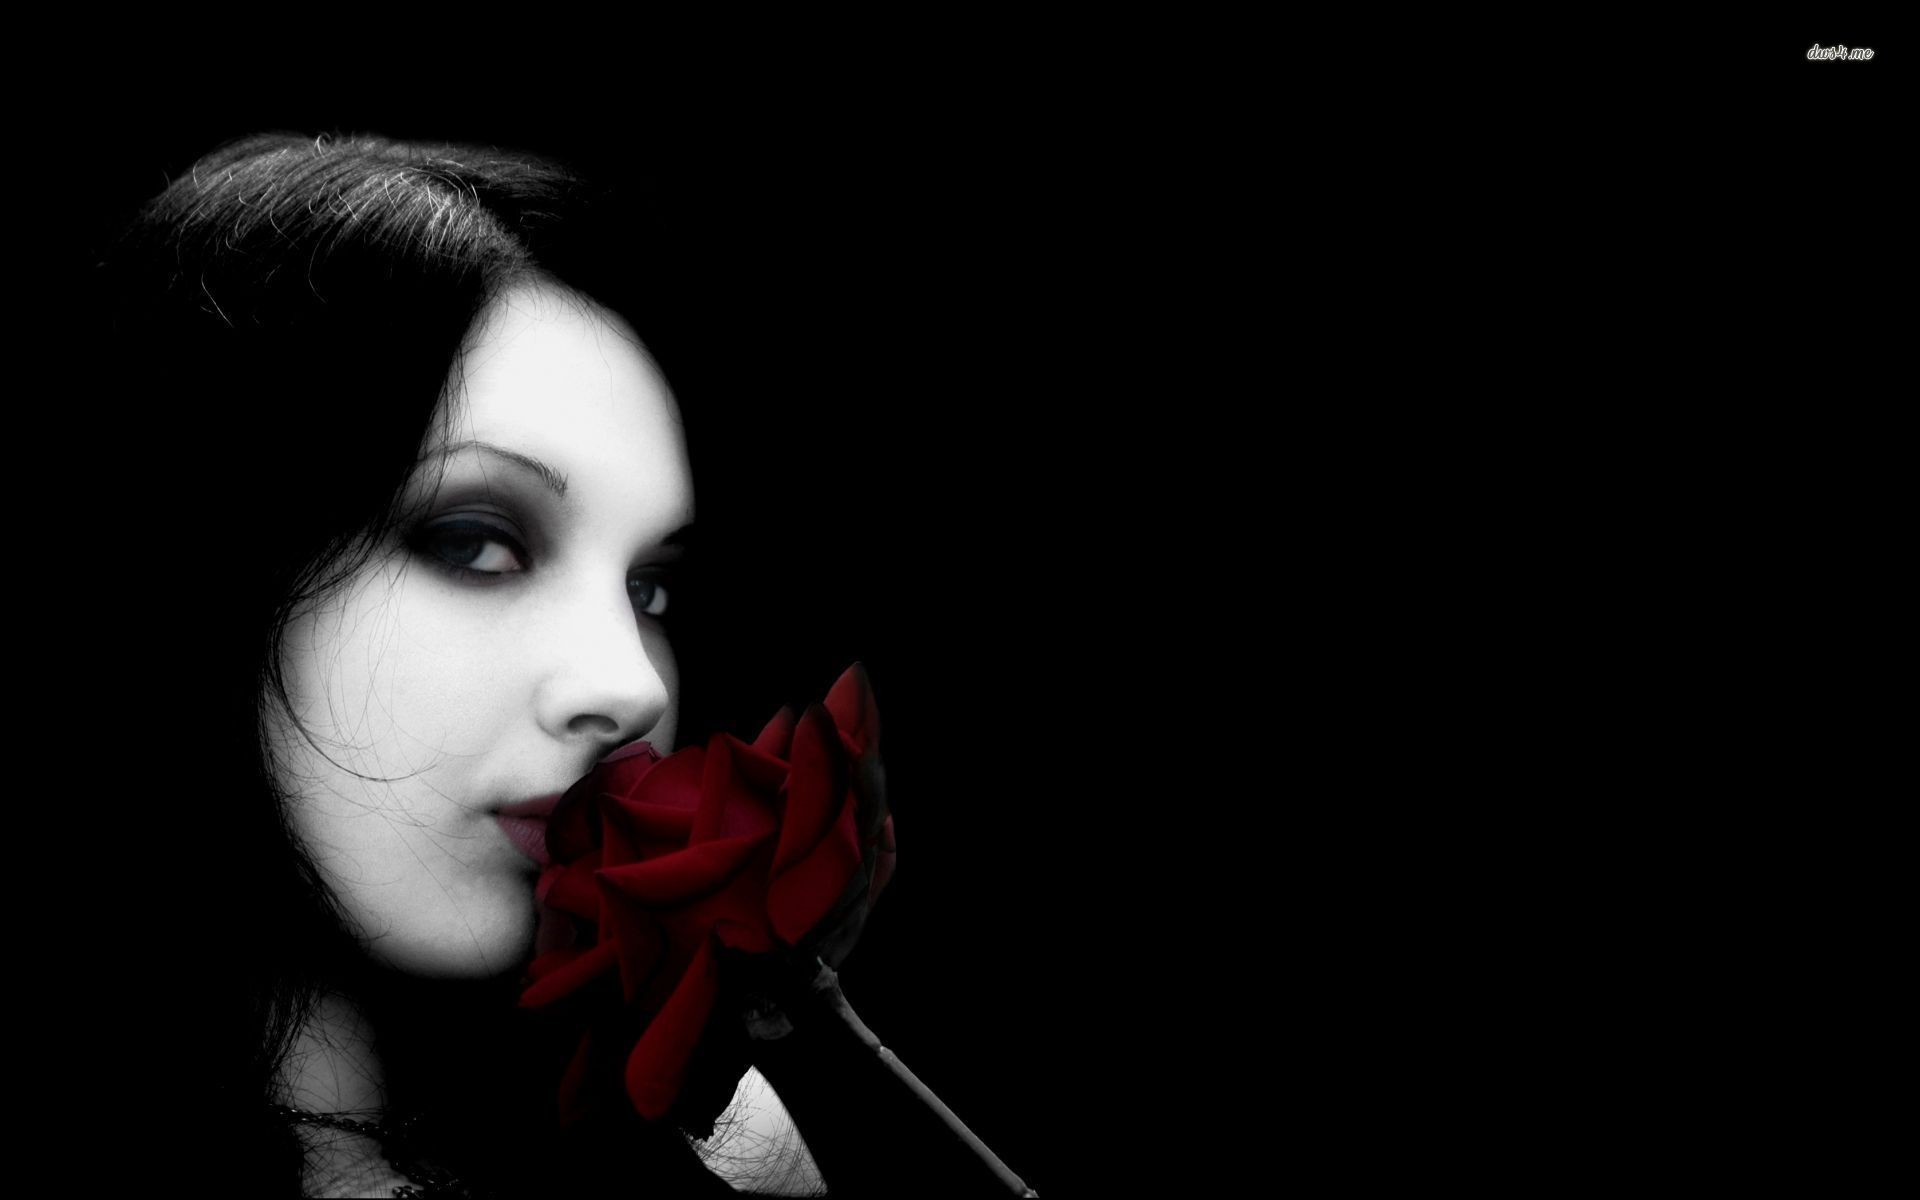 Goth girl with a red rose wallpaper – Digital Art wallpapers